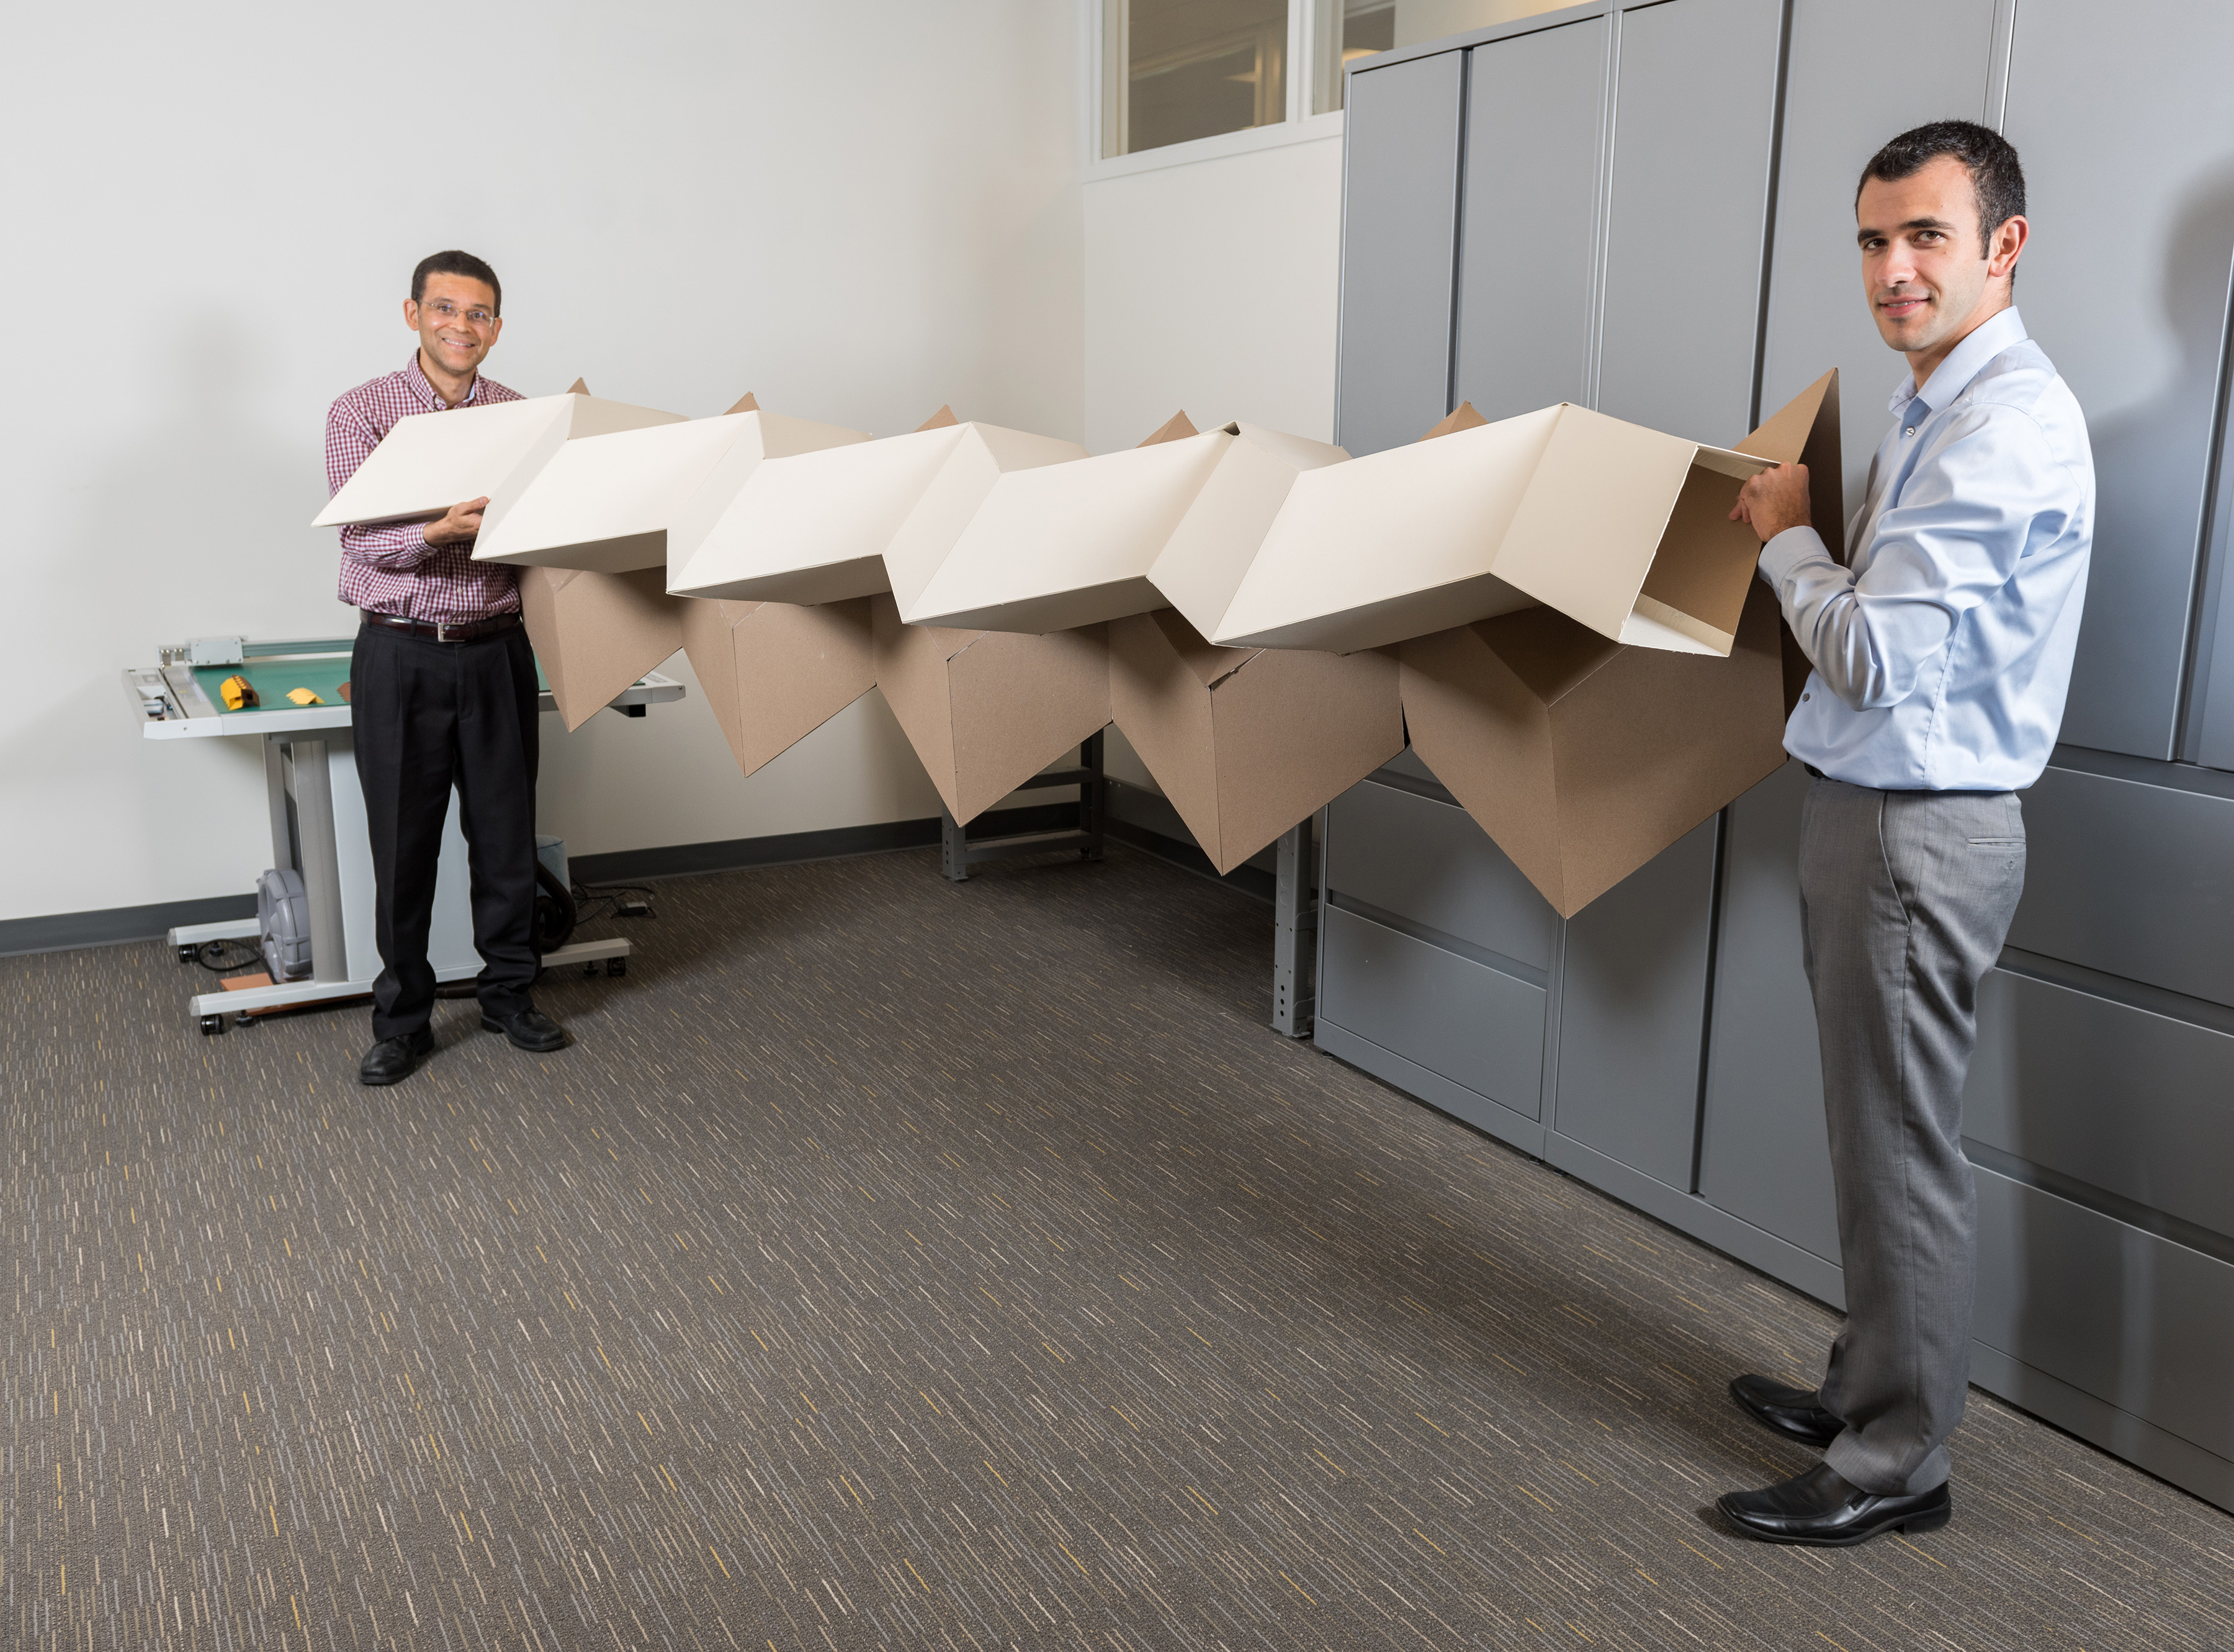 Researchers Glaucio Paulino (left) and Evgueni Filipov show a large origami structure that can be folded into a much smaller space. Filipov is from University of Illinois at Urbana-Champaign; Paulino is from the Georgia Institute of Technology. (Credit: Rob Felt, Georgia Tech)